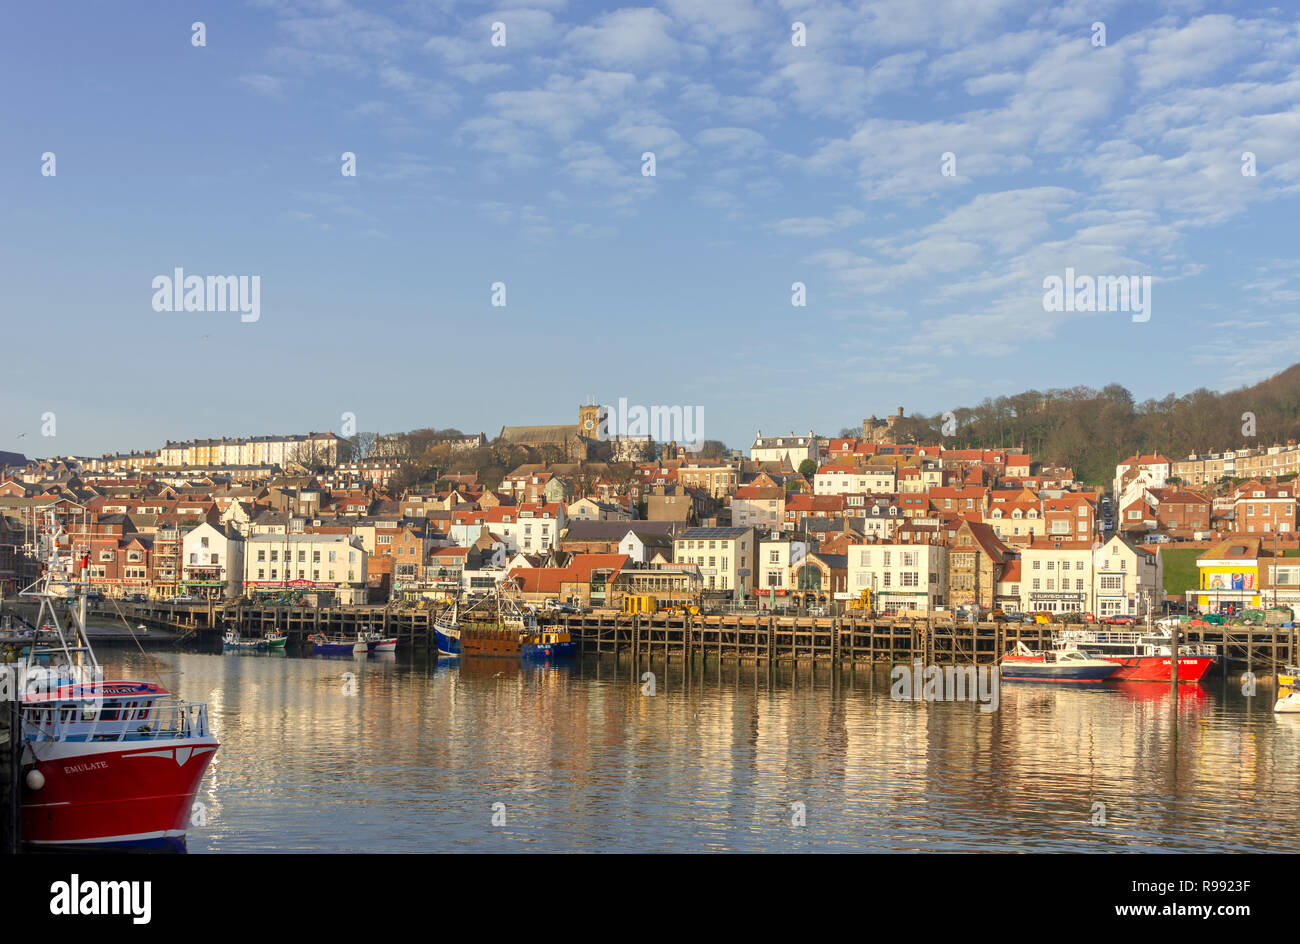 The harbour and town at Scarborough.  Boats are moored in the harbour and the buildings of the town behind. Stock Photo